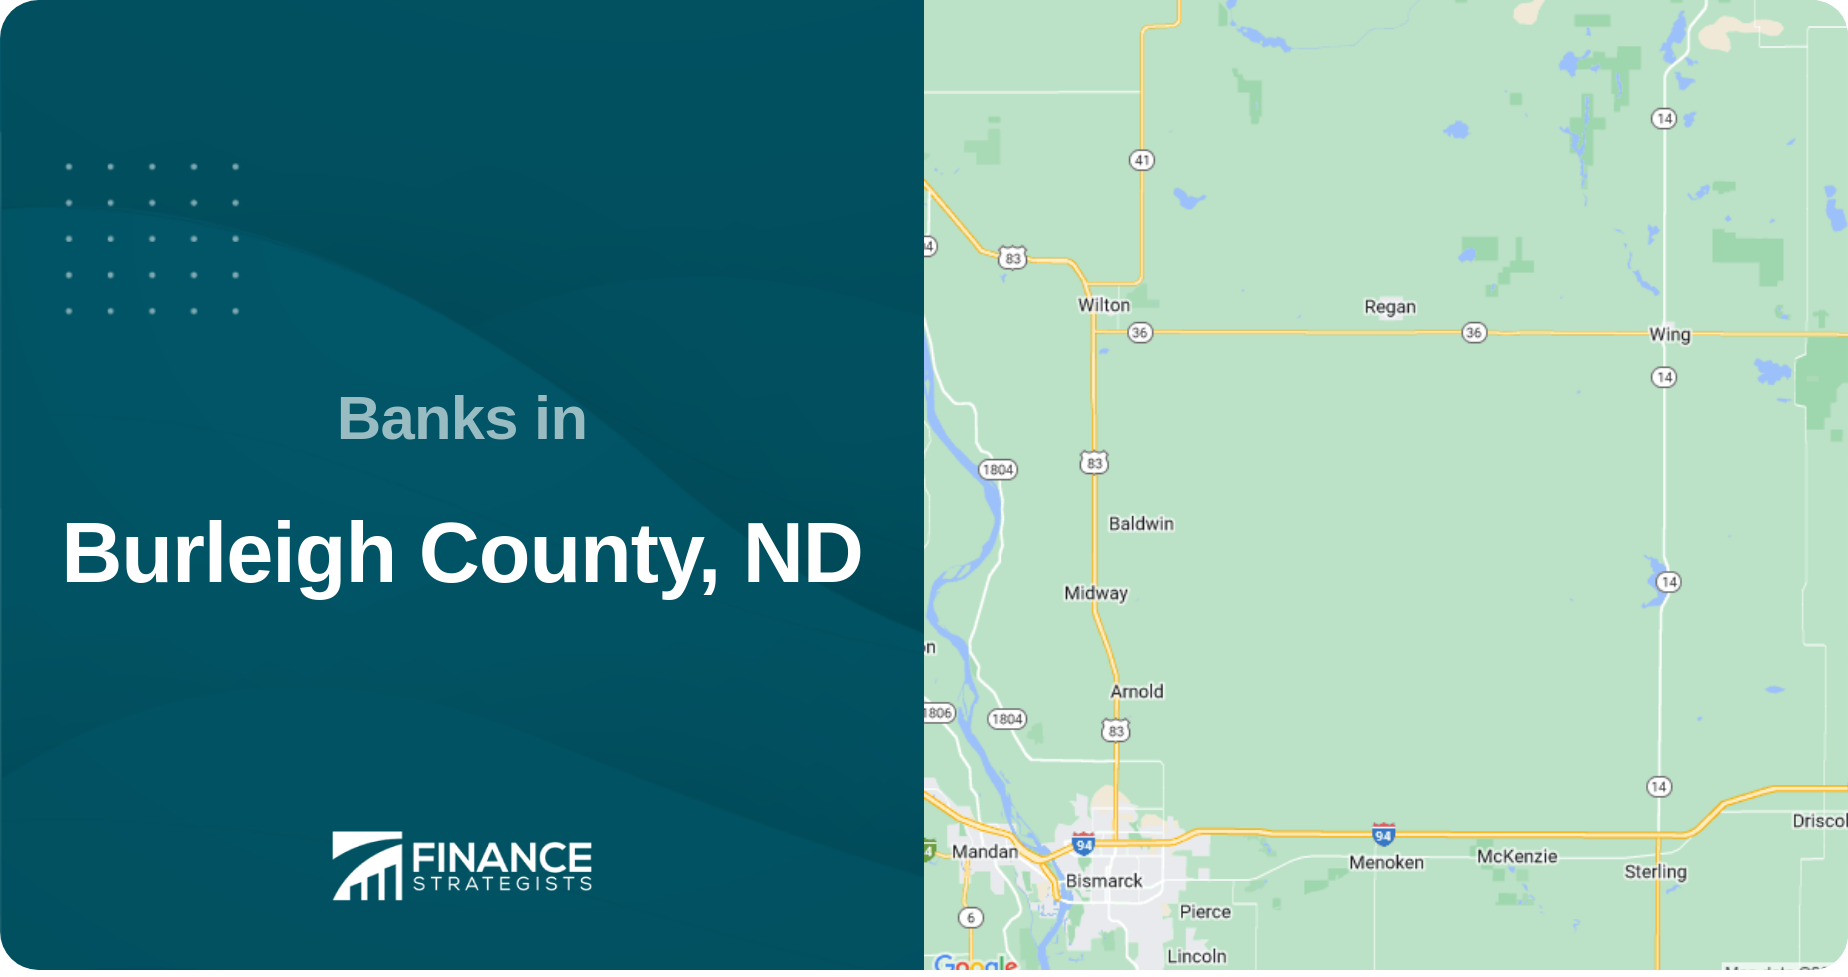 Banks in Burleigh County, ND